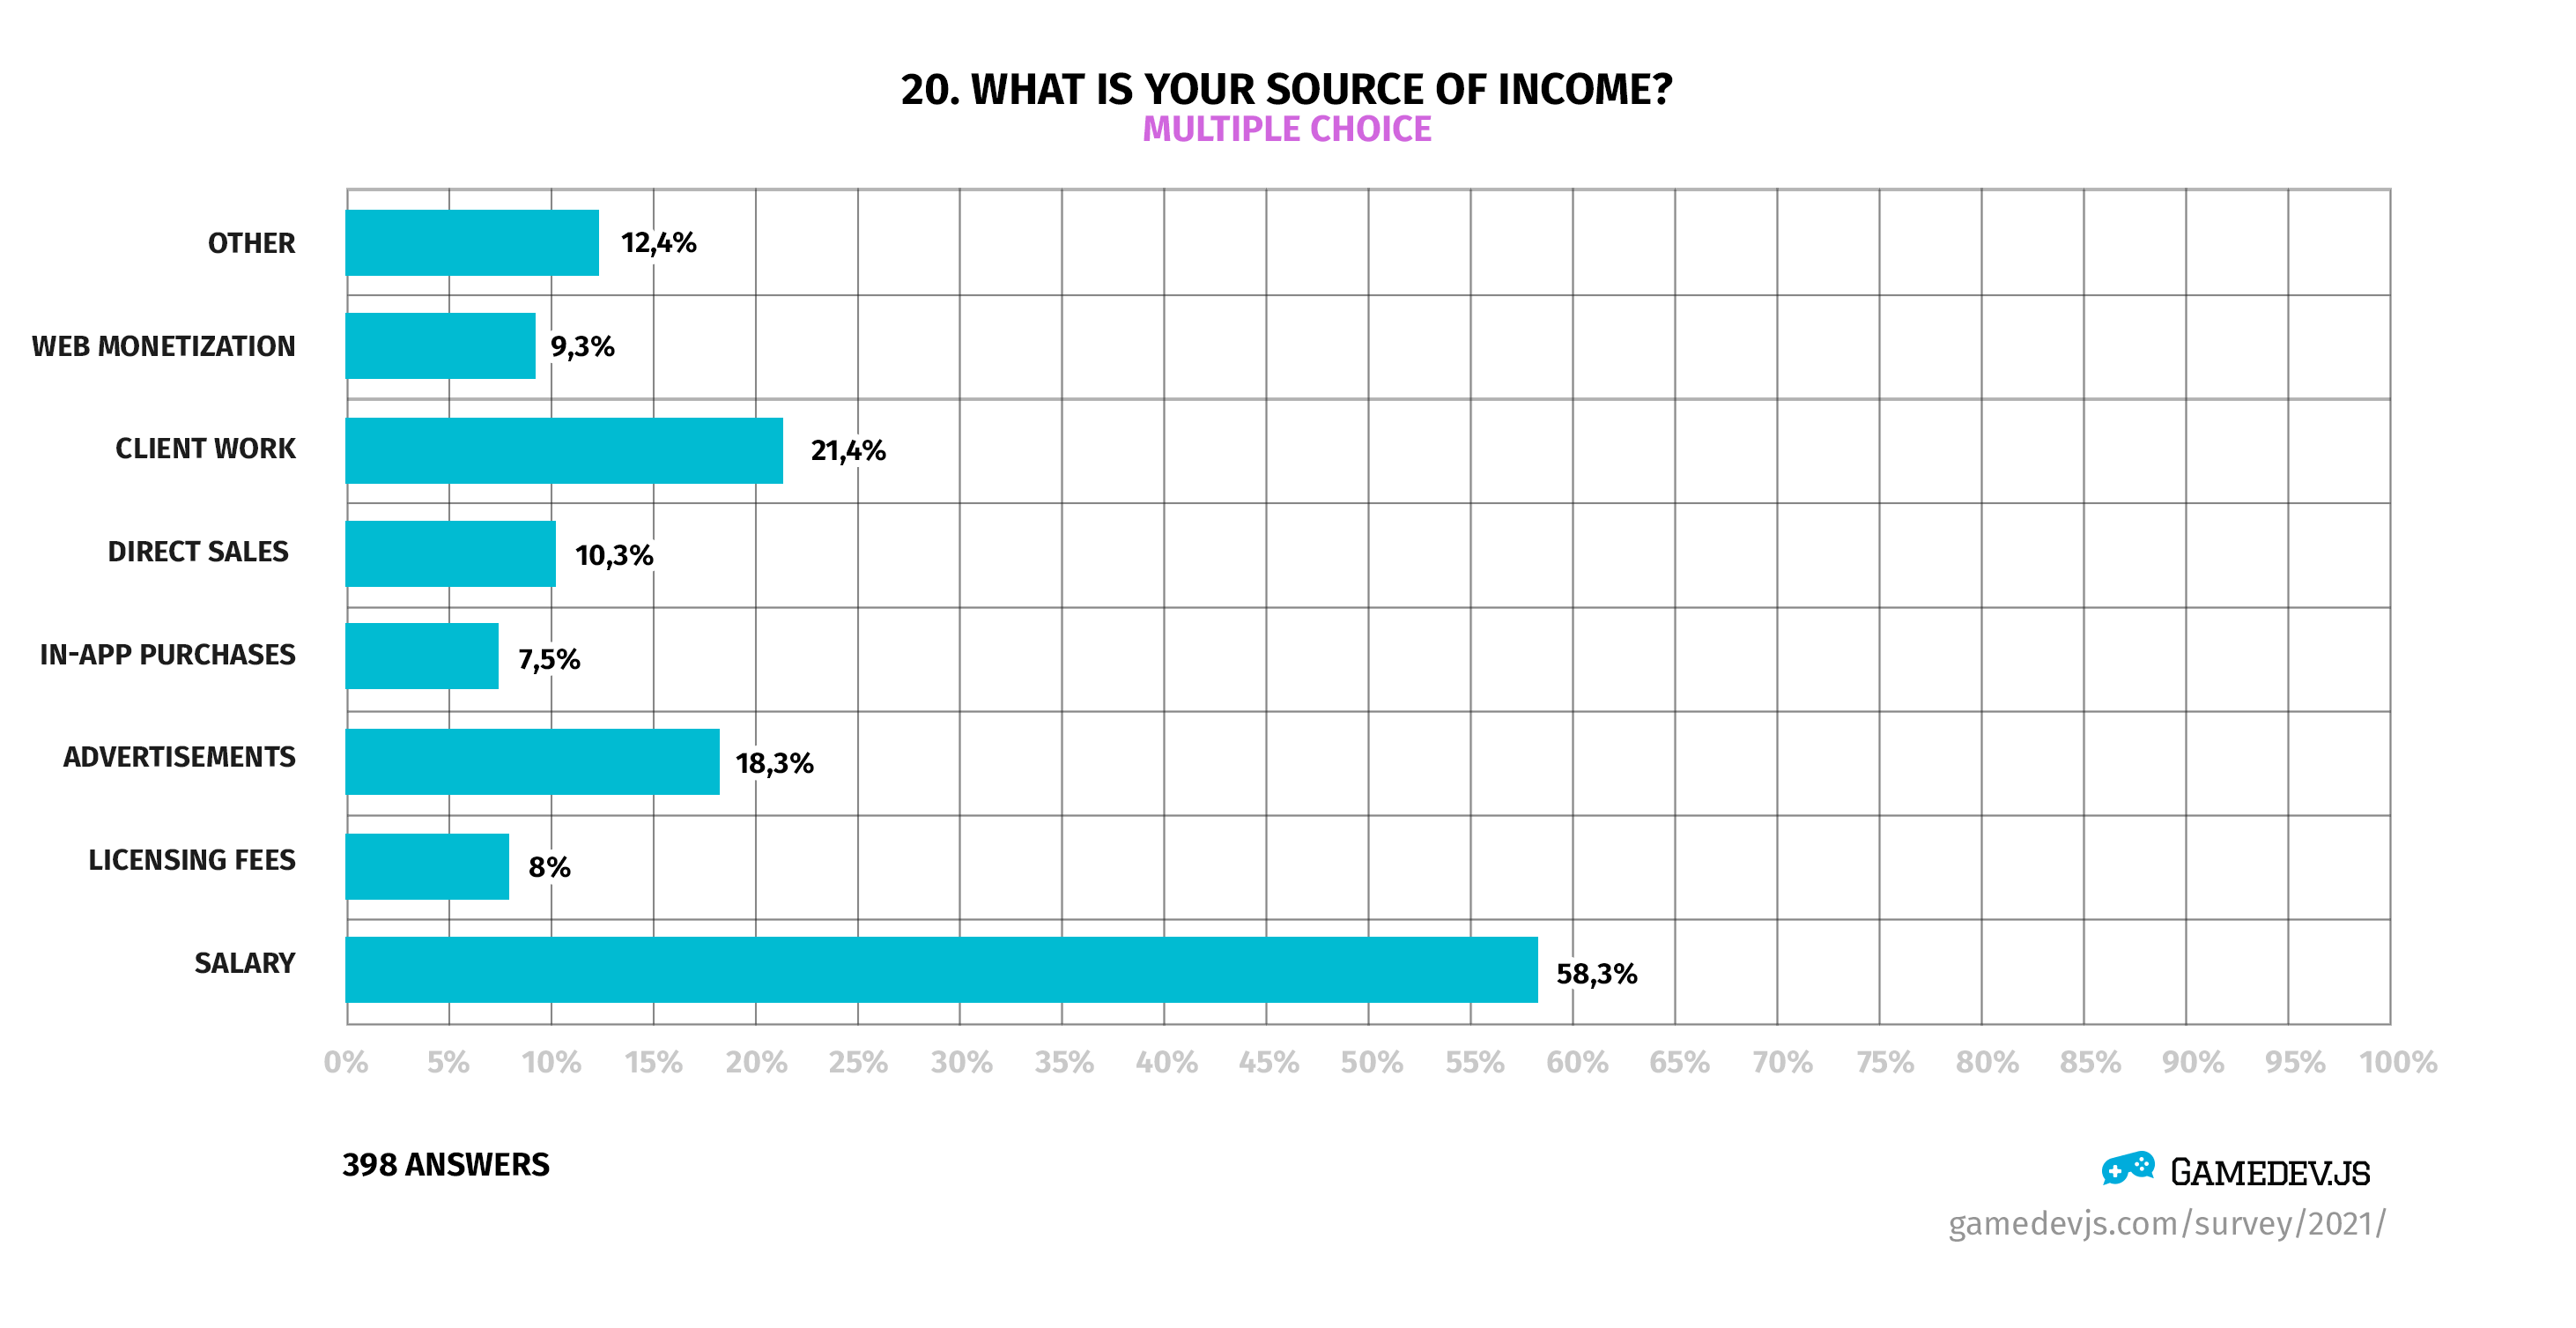 Gamedev.js Survey 2021 - Question #20: What is your source of income?